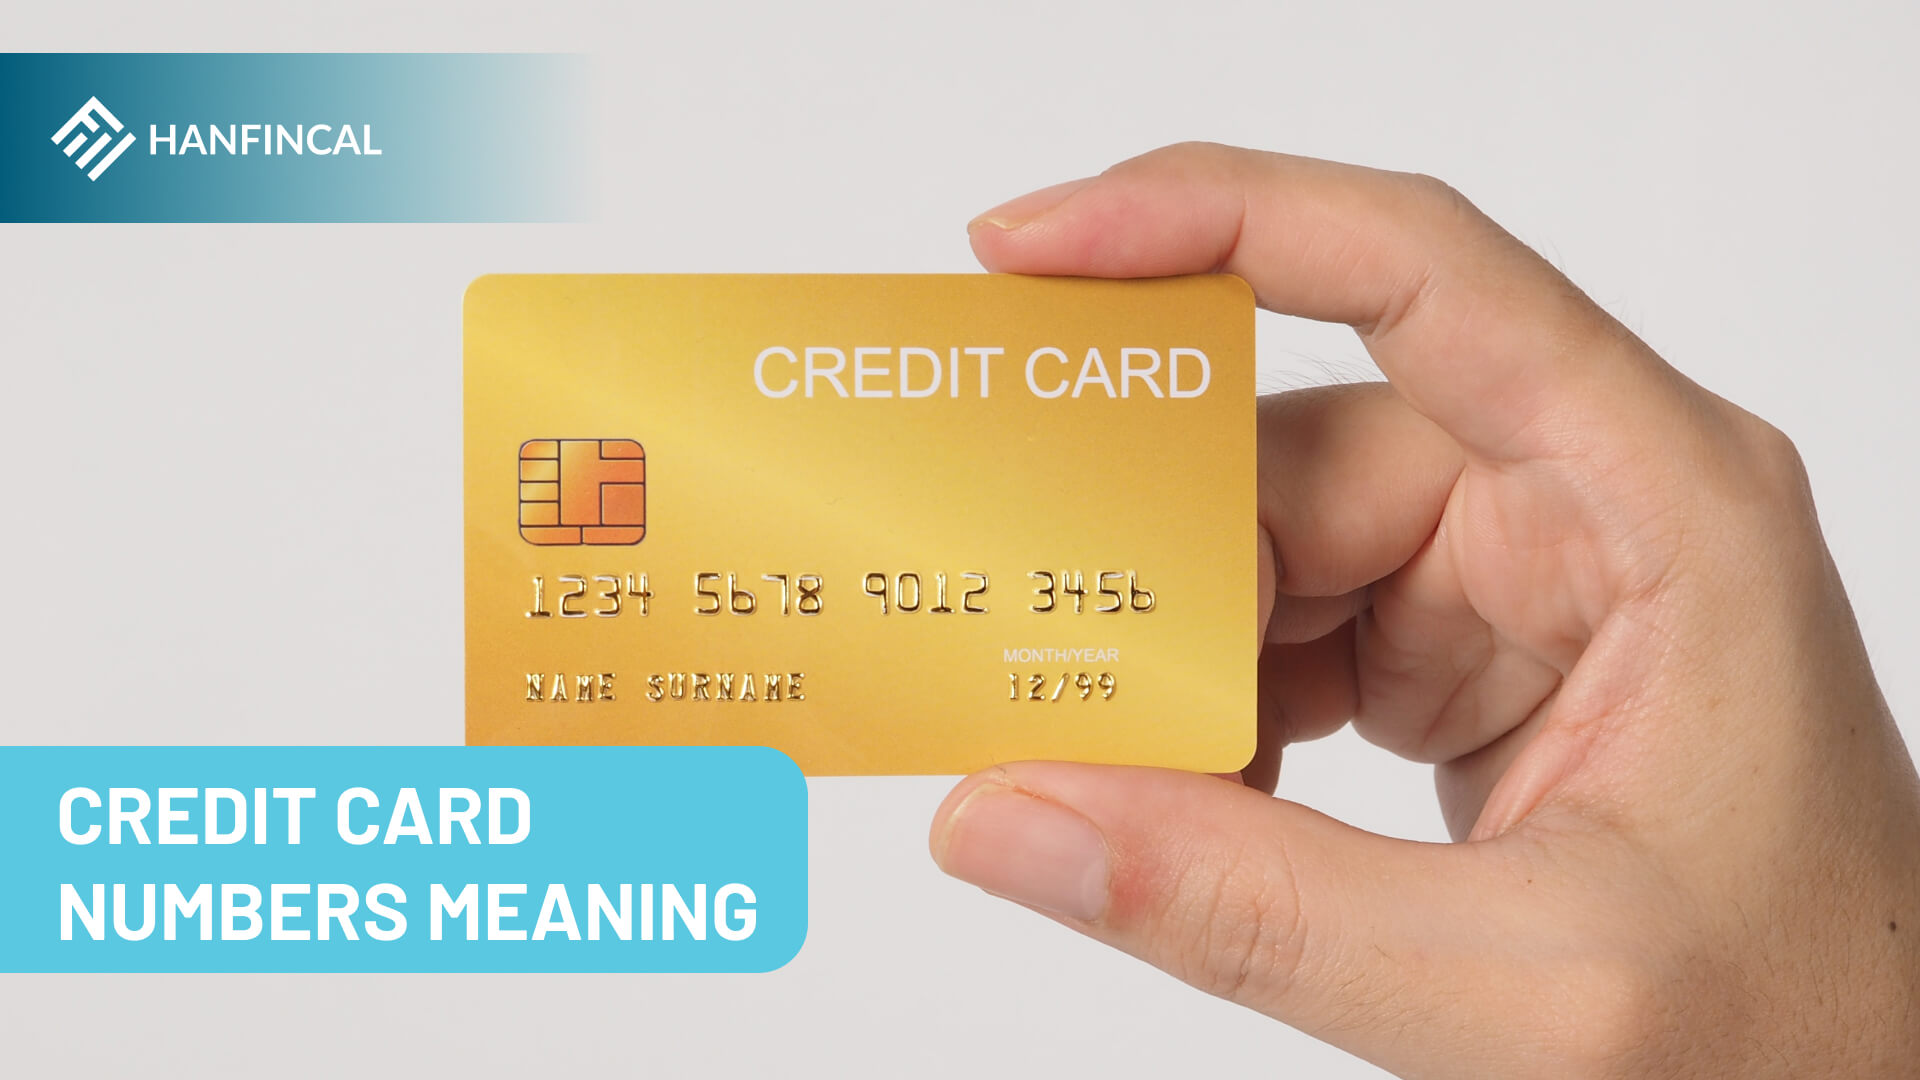 Credit card numbers meaning